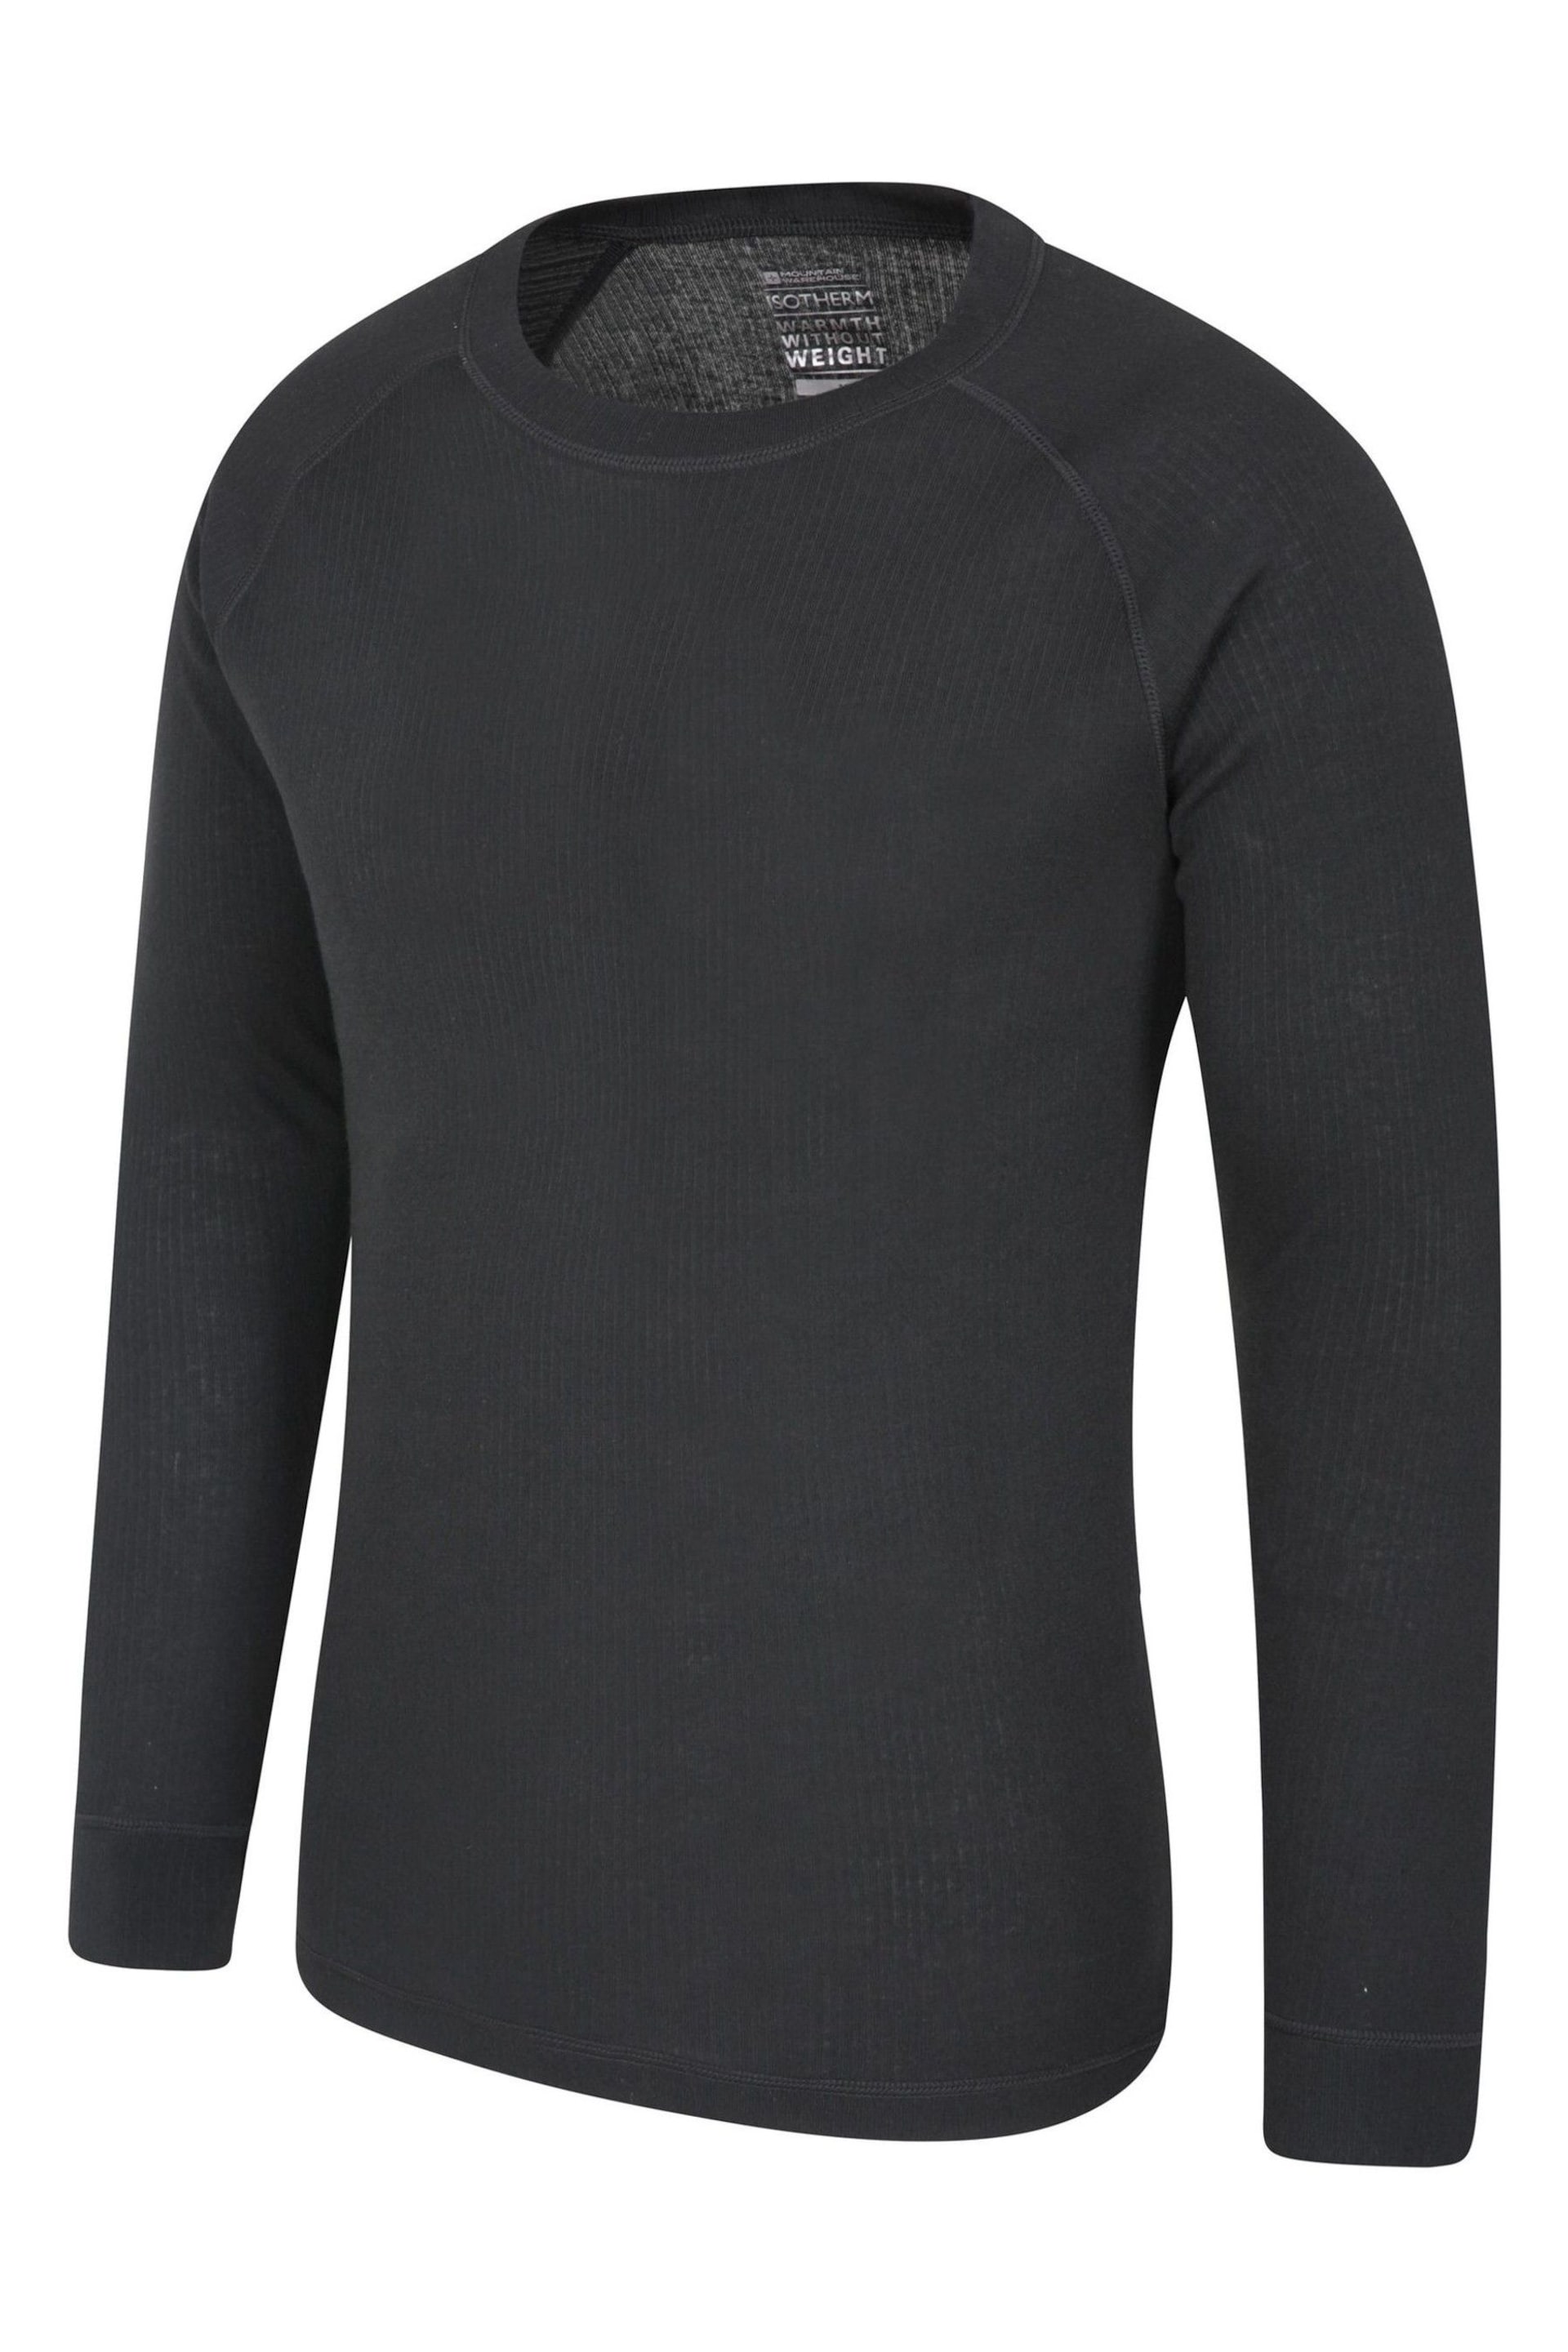 Mountain Warehouse Black Talus Mens Long Sleeved Thermal Top - Image 3 of 5